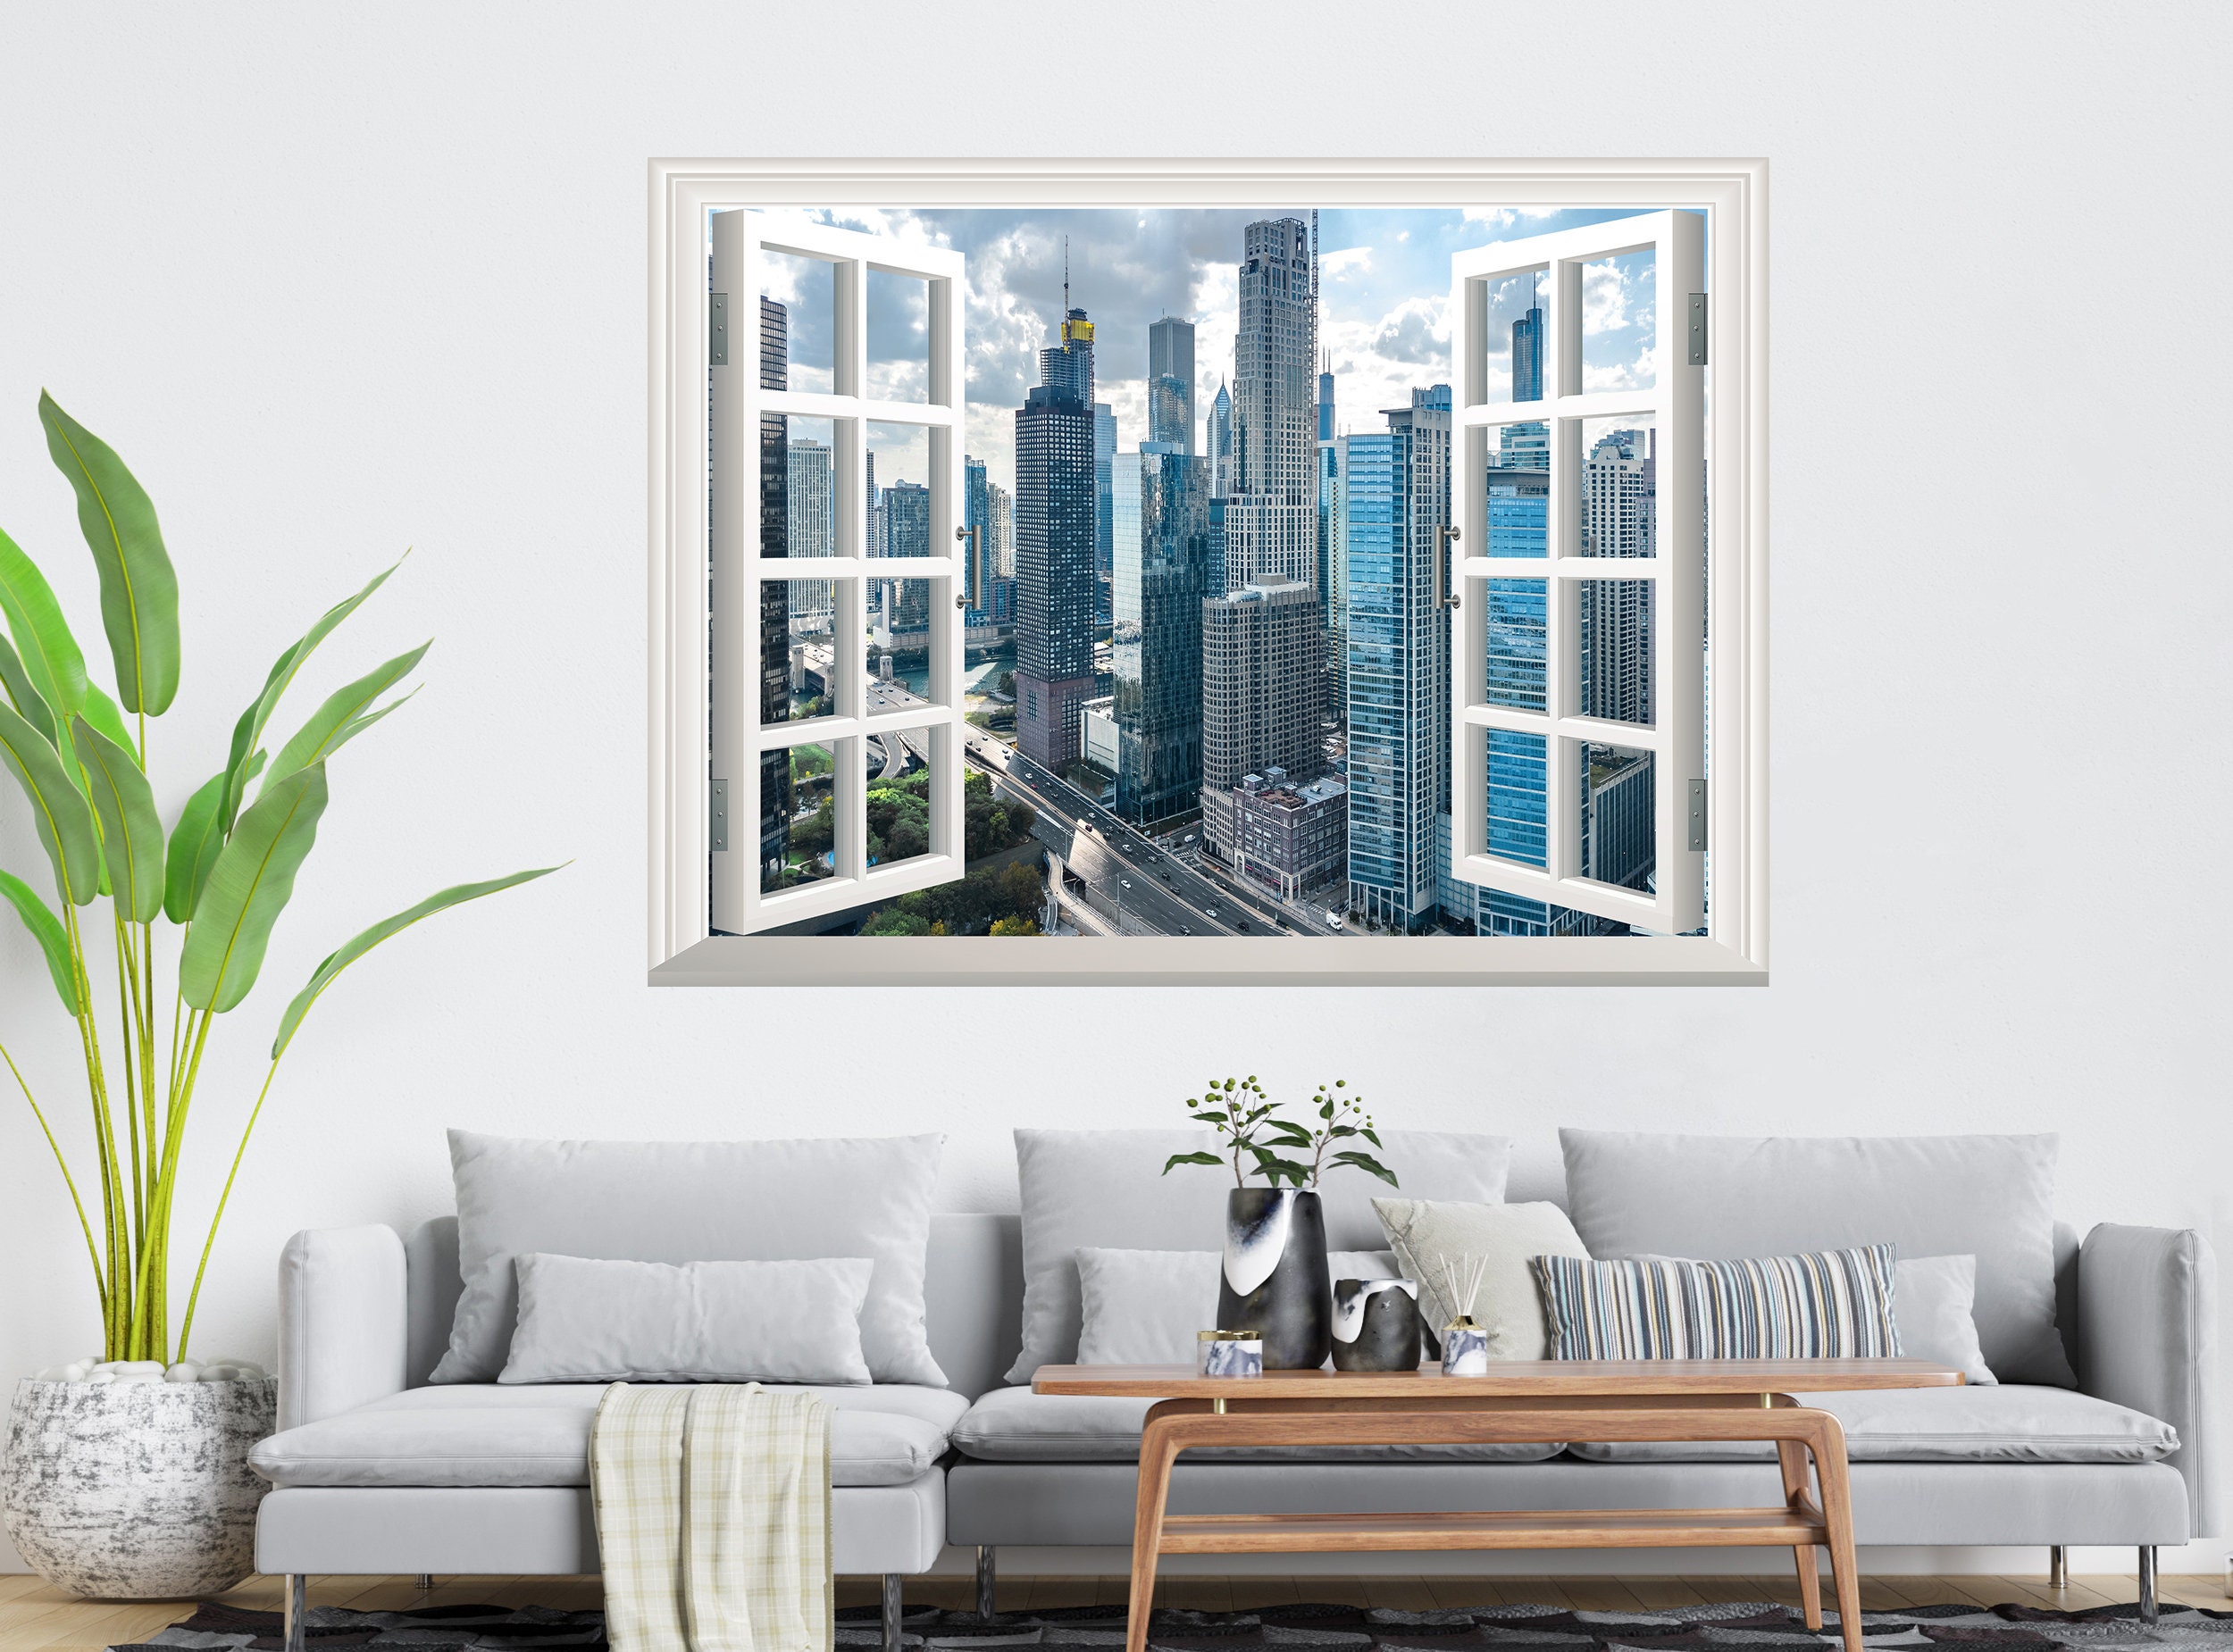 3d Window View Wall Stickers City Of The Future Wall Decal Sticker Frame  Mural Effect Home Decor Bedroom Living Room Kitchen - Wall Stickers -  AliExpress